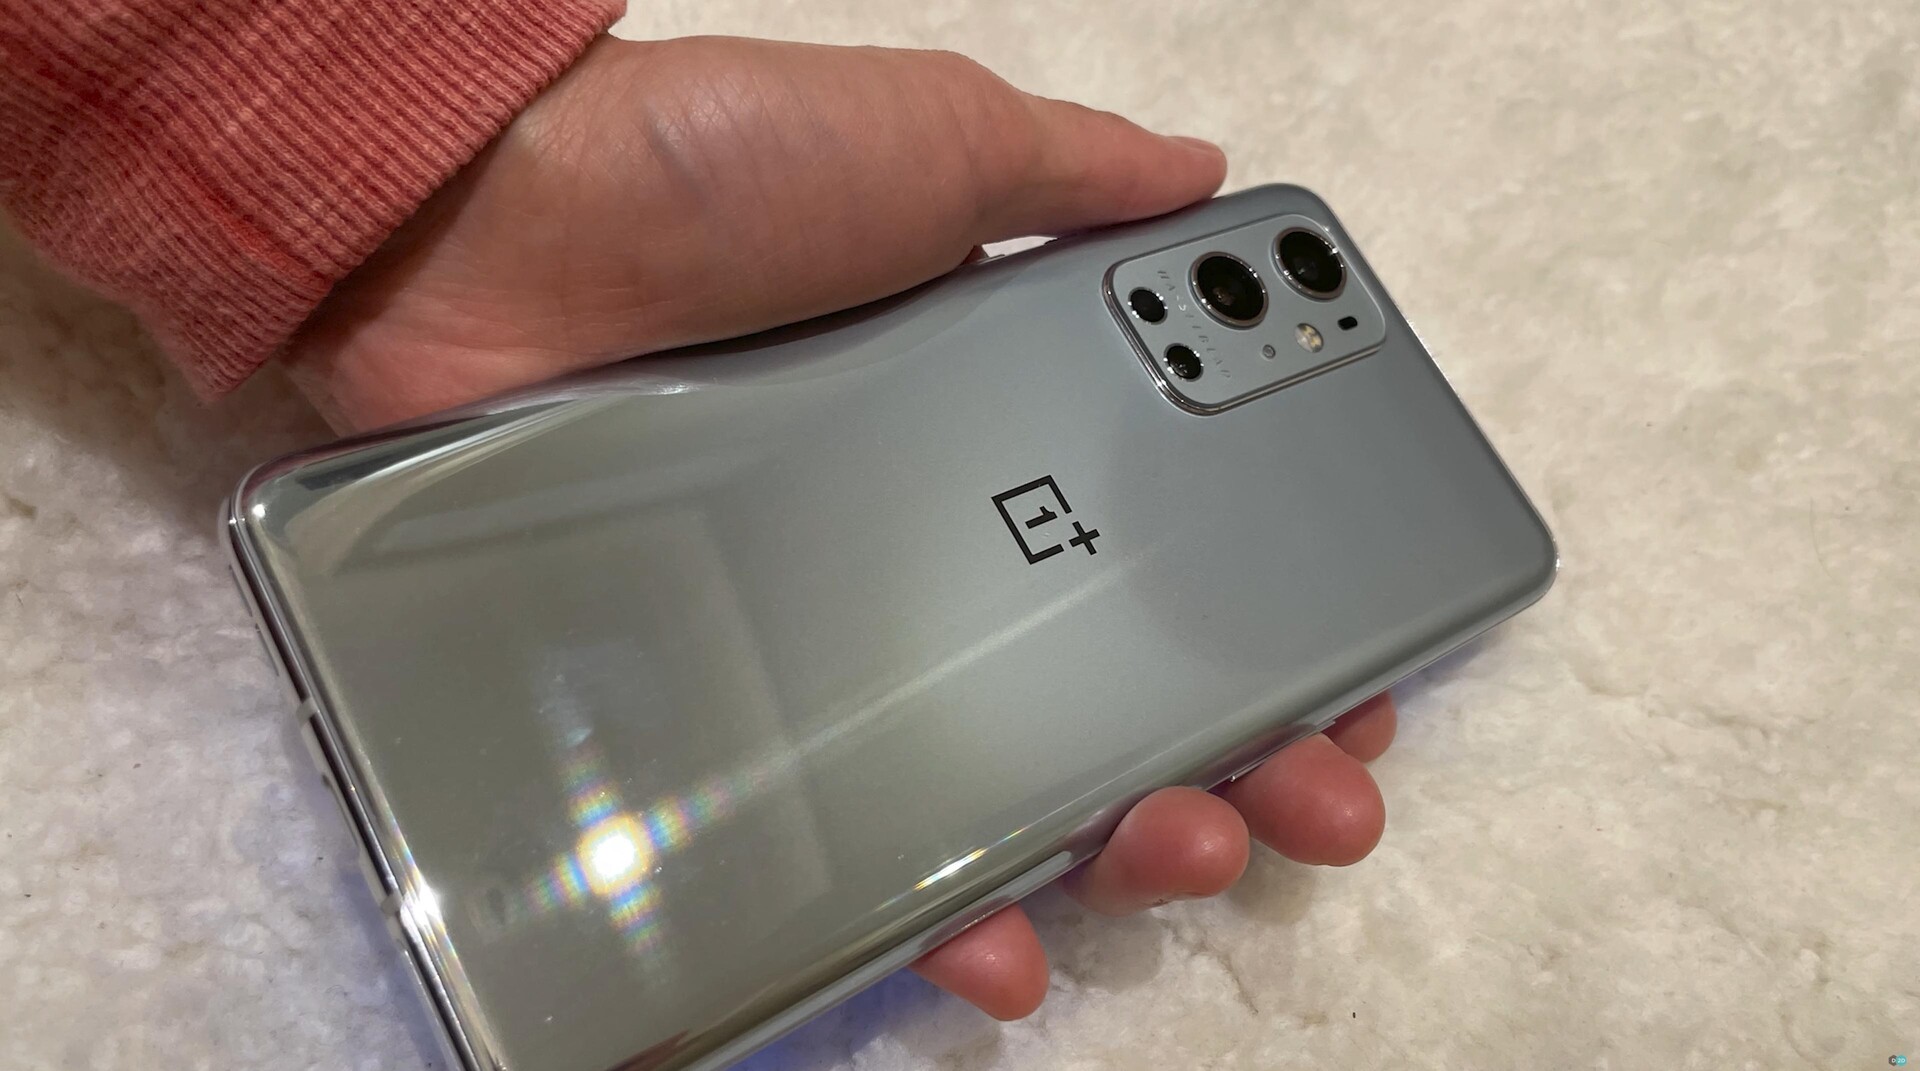 OnePlus 9 Pro leaks again with 4K and 120 FPS video recording capabilities and upgraded camera hardware;  OnePlus 9 Series launches teasers to launch soon